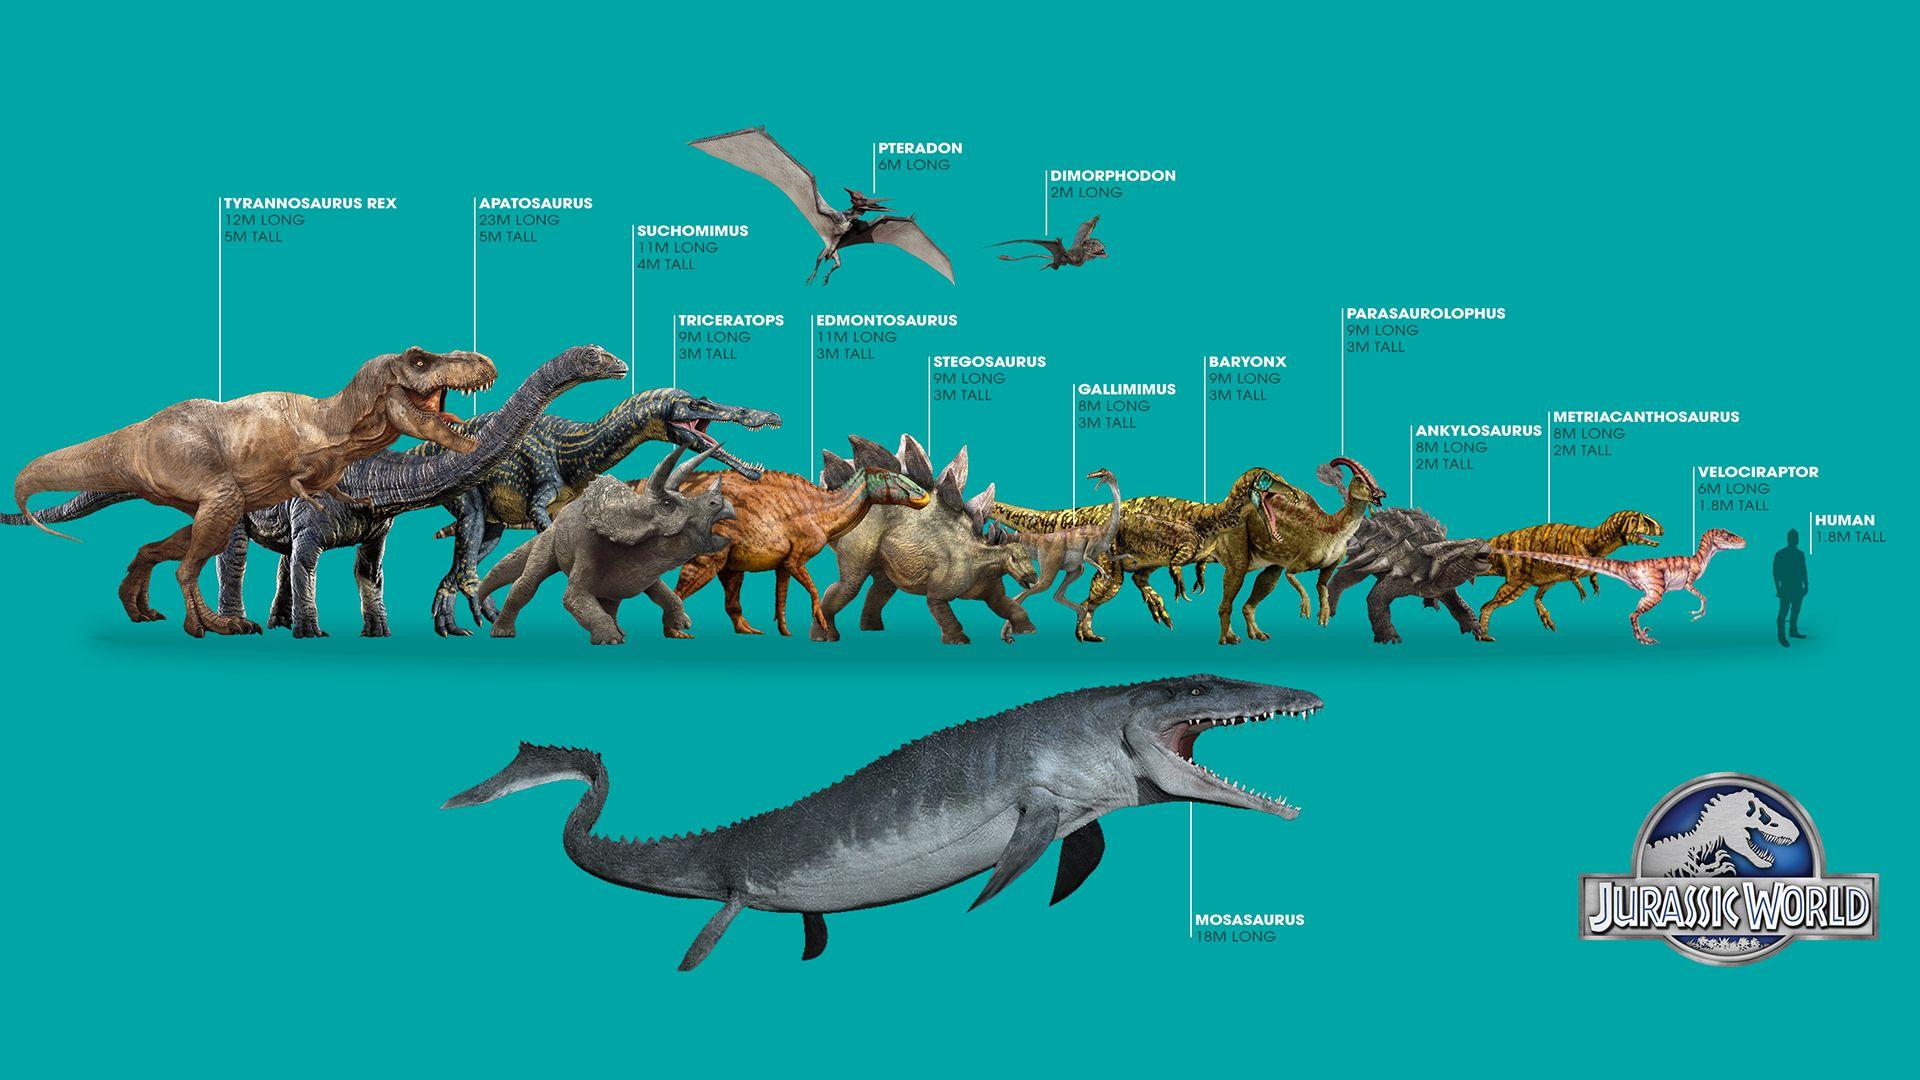 Jurassic World Dinosaurs Wallpaper Sizes and Correct Scale